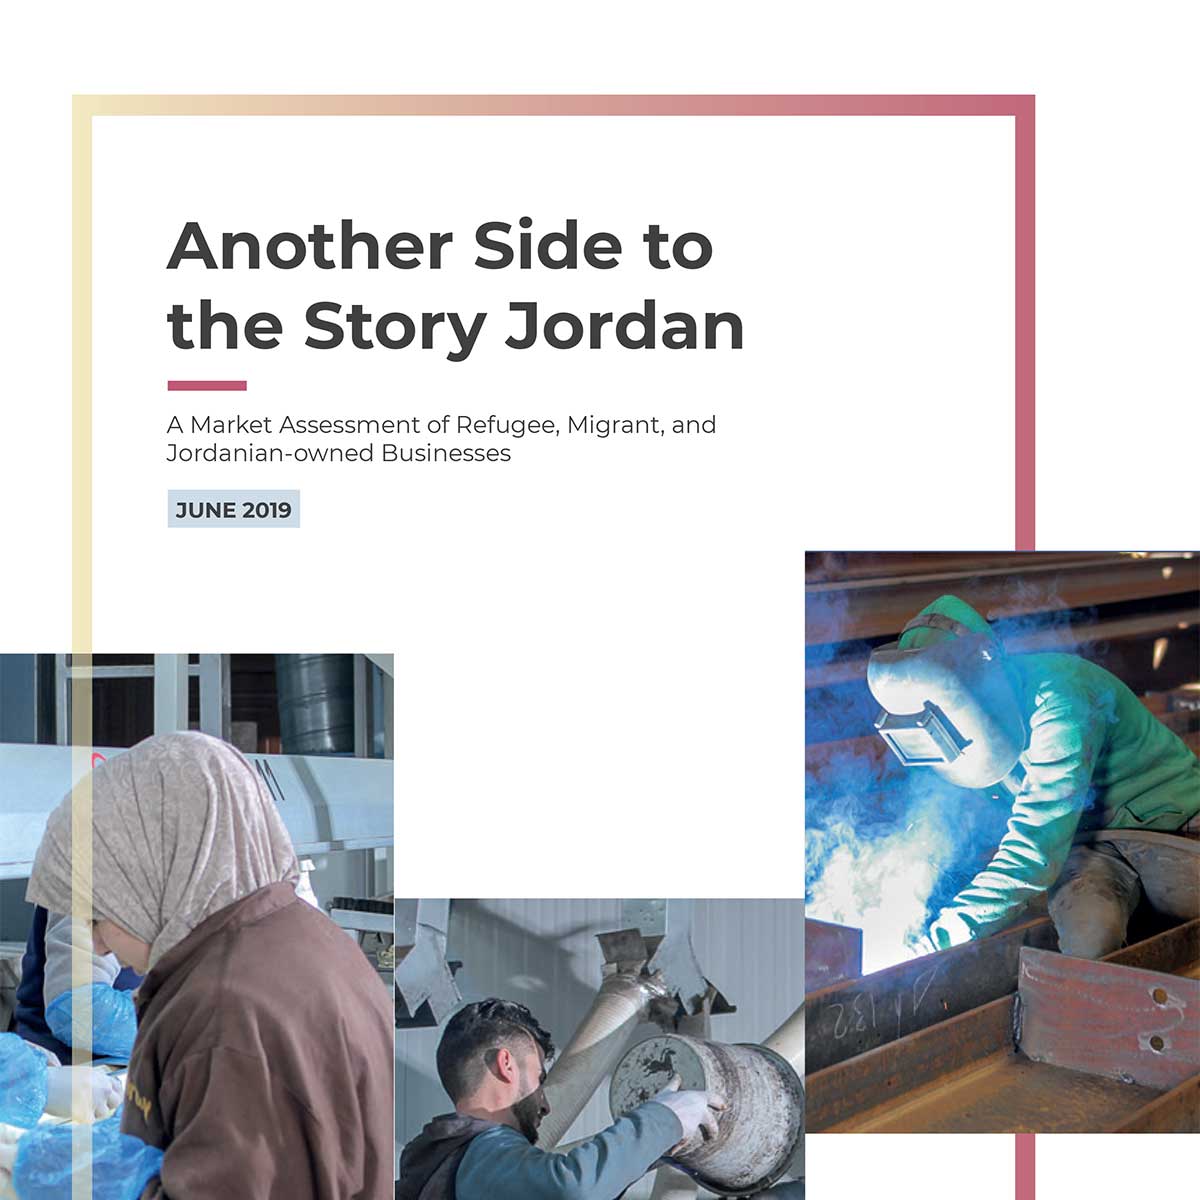 Another Side to the Story Jordan: A Market Assessment of Refugee, Migrant, and Jordanian-owned Businesses (2019)